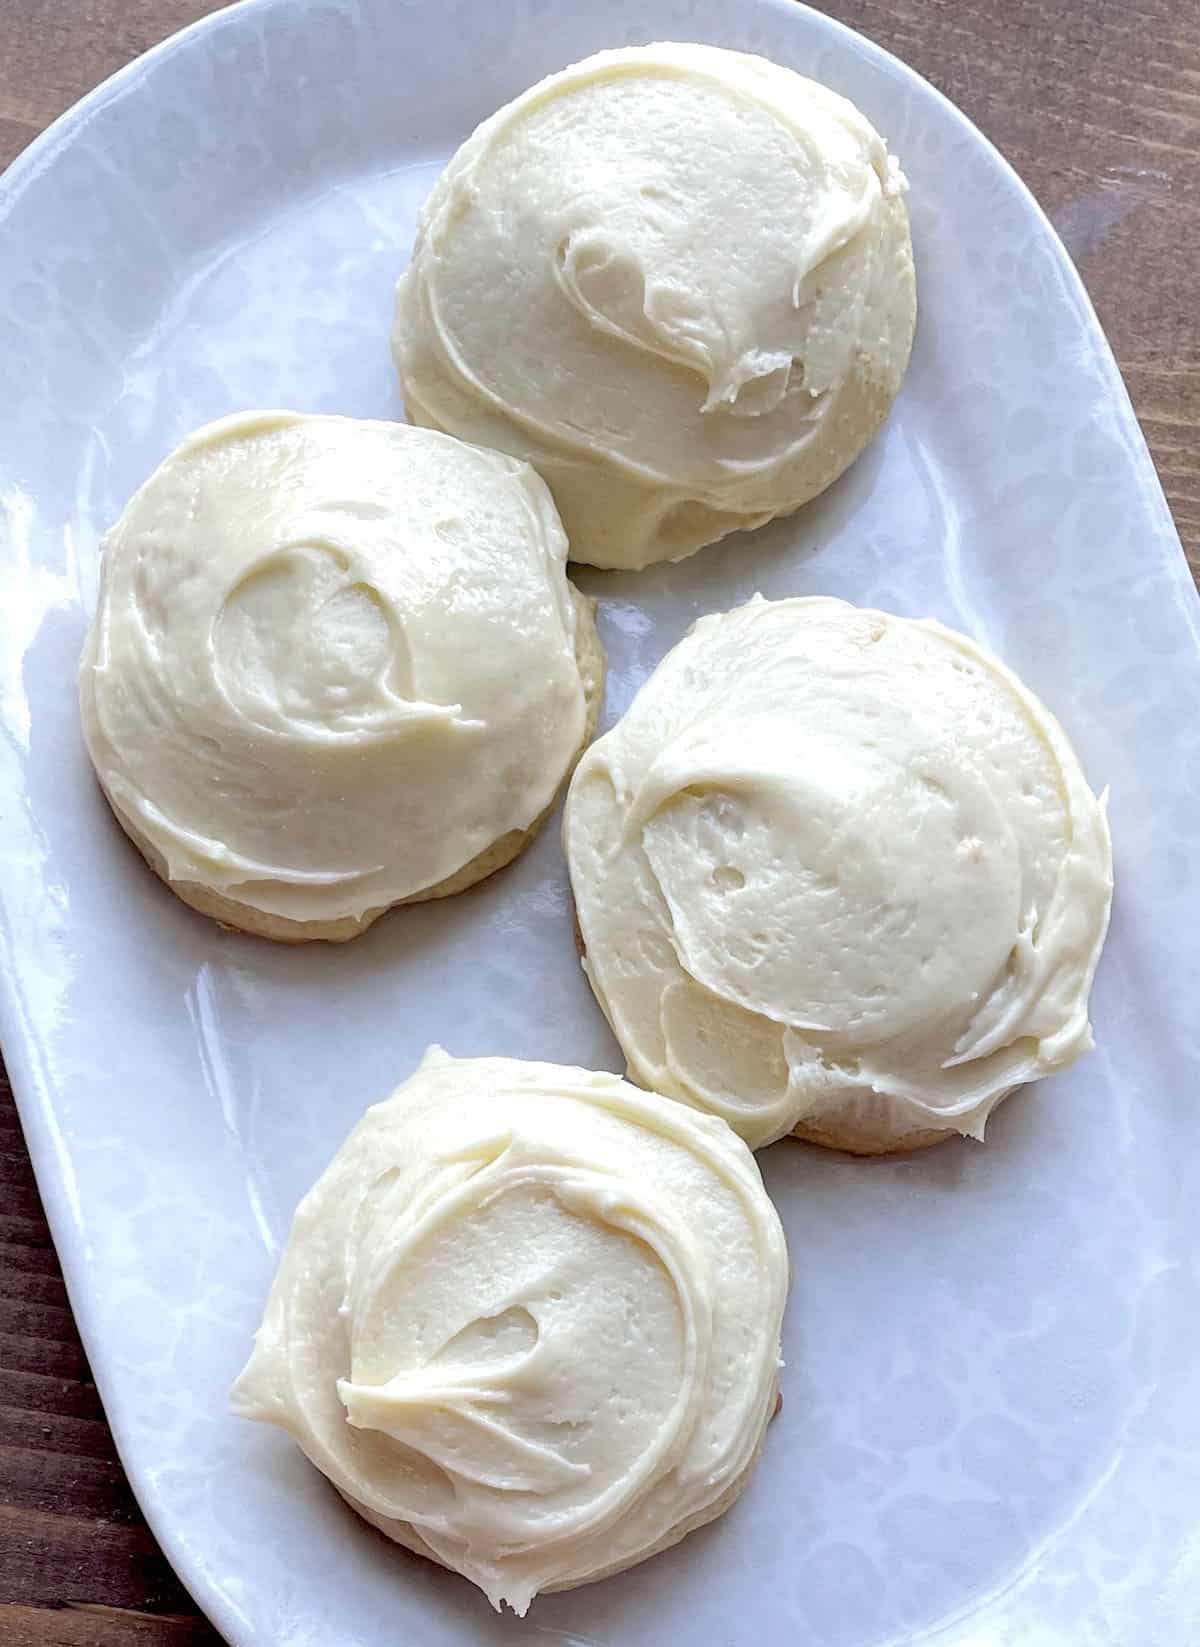 Four frosted buttermilk cookies on a white plate.